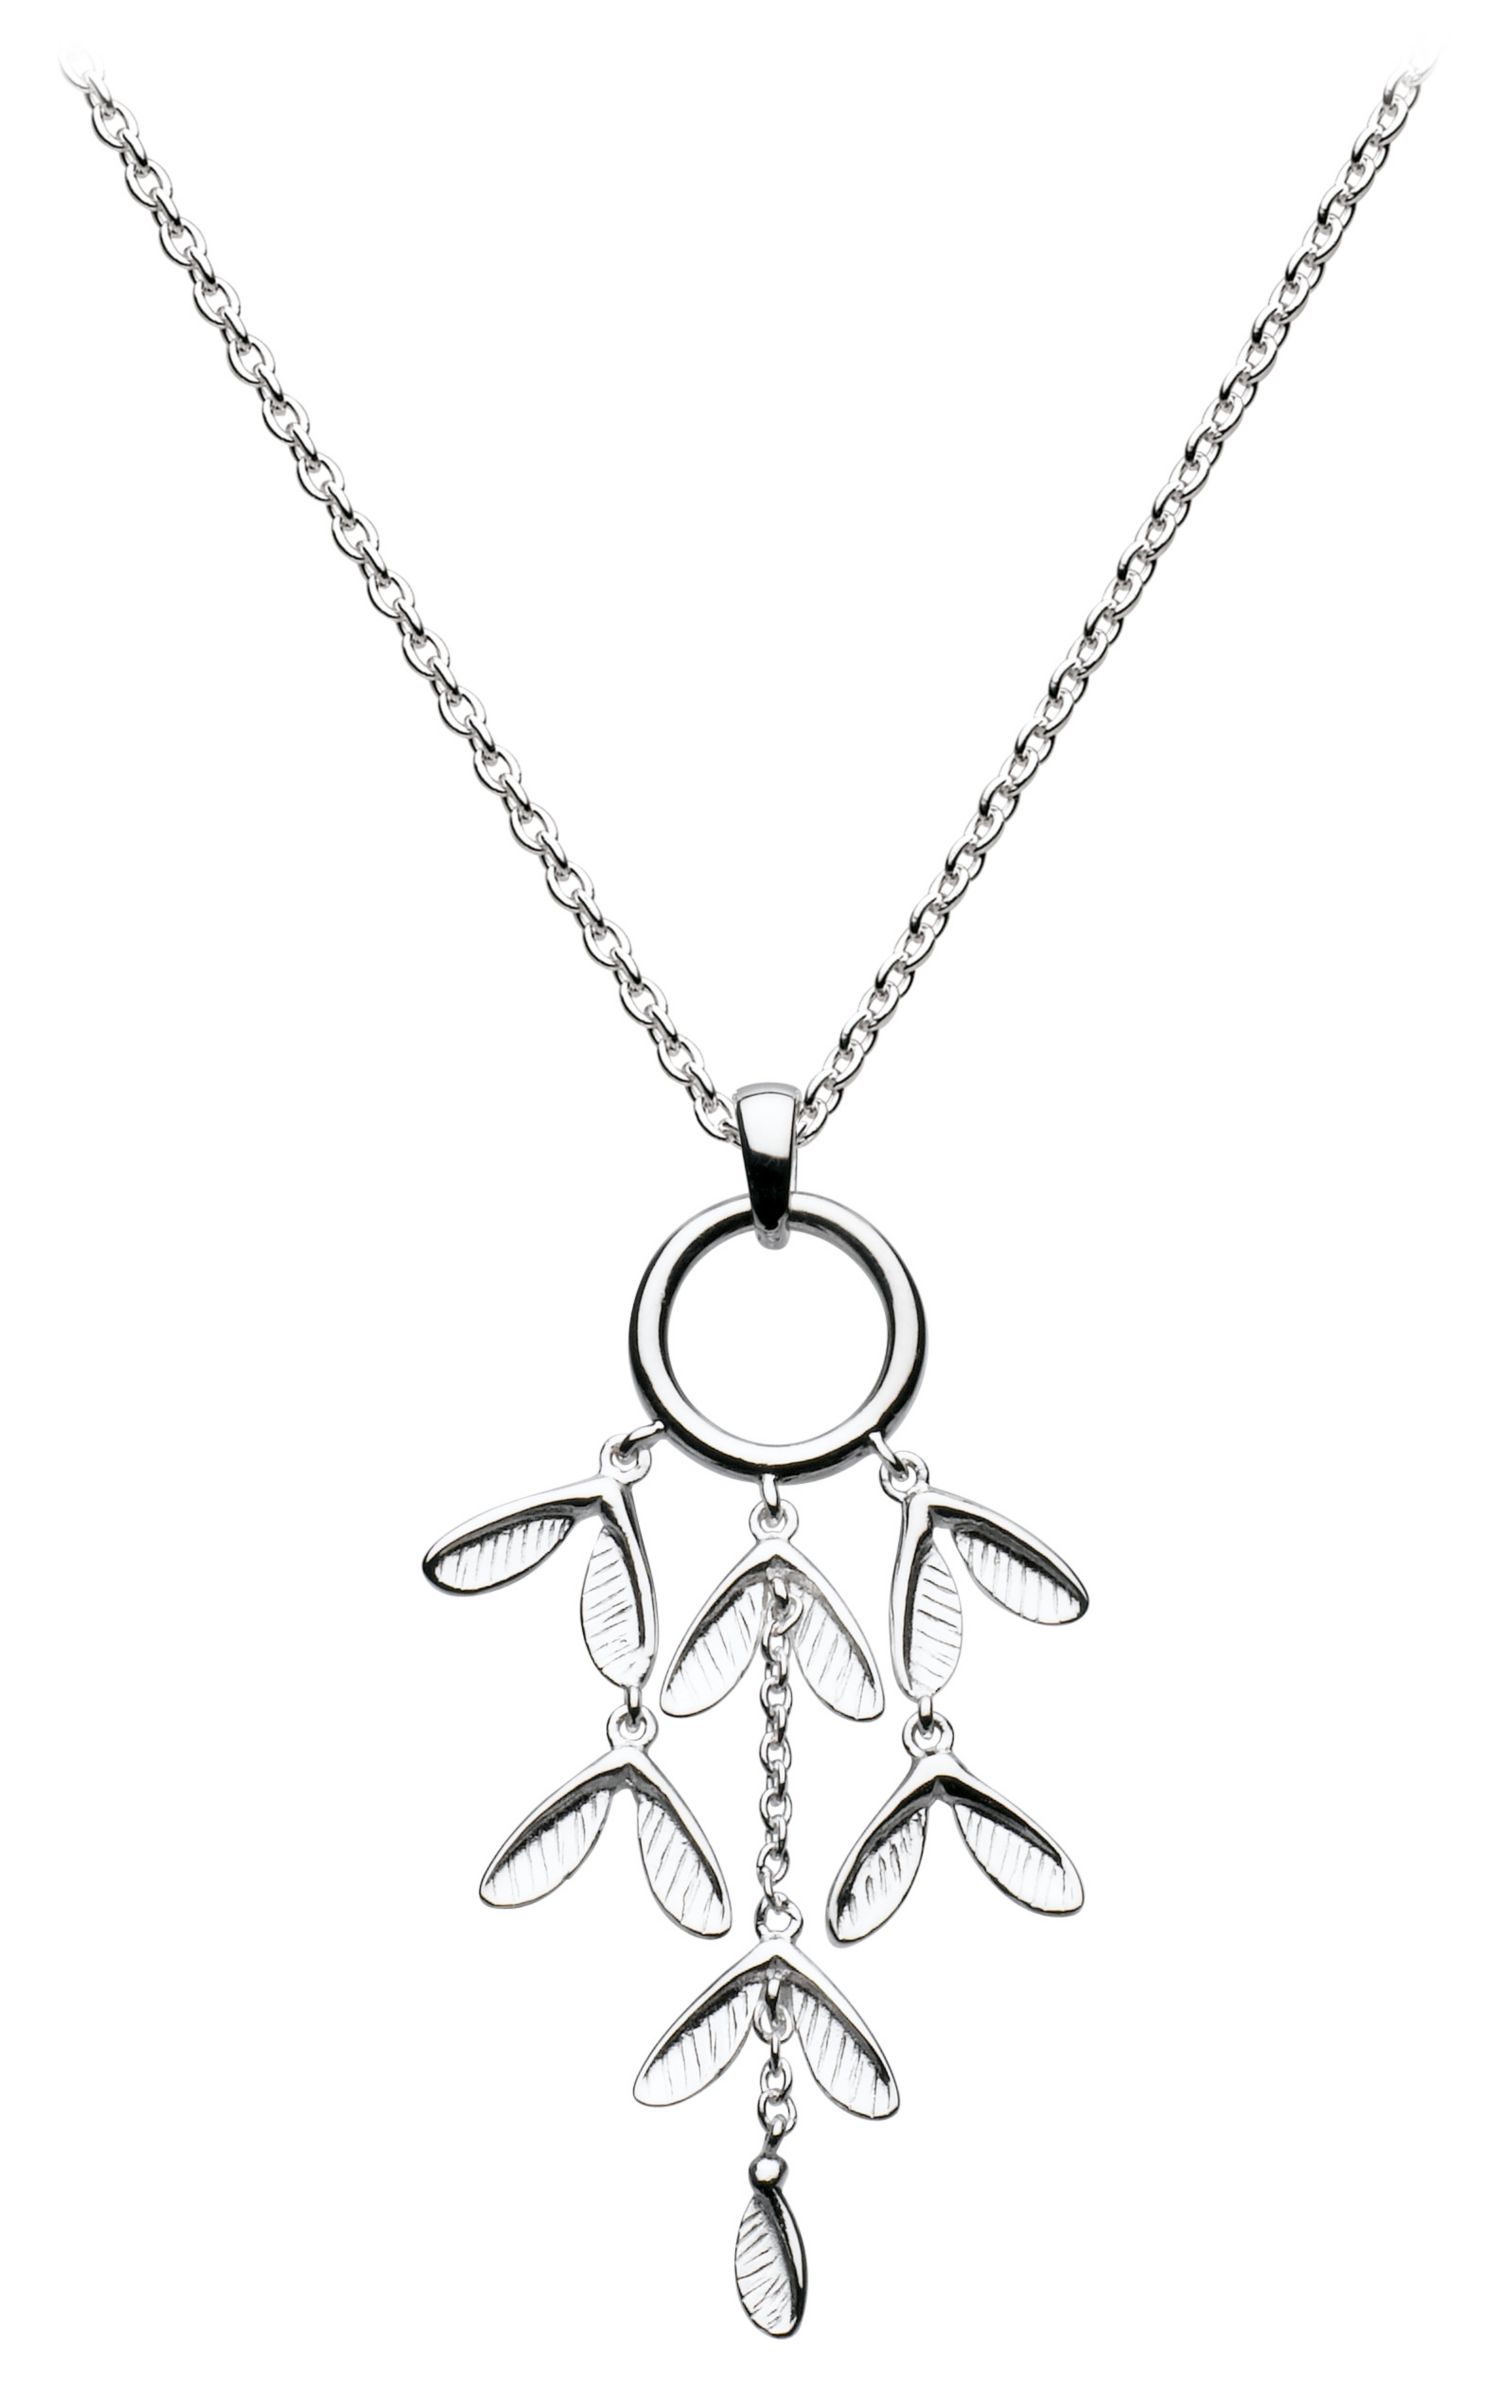 Kit Heath Sterling Silver Sycamore Seeds Pendant